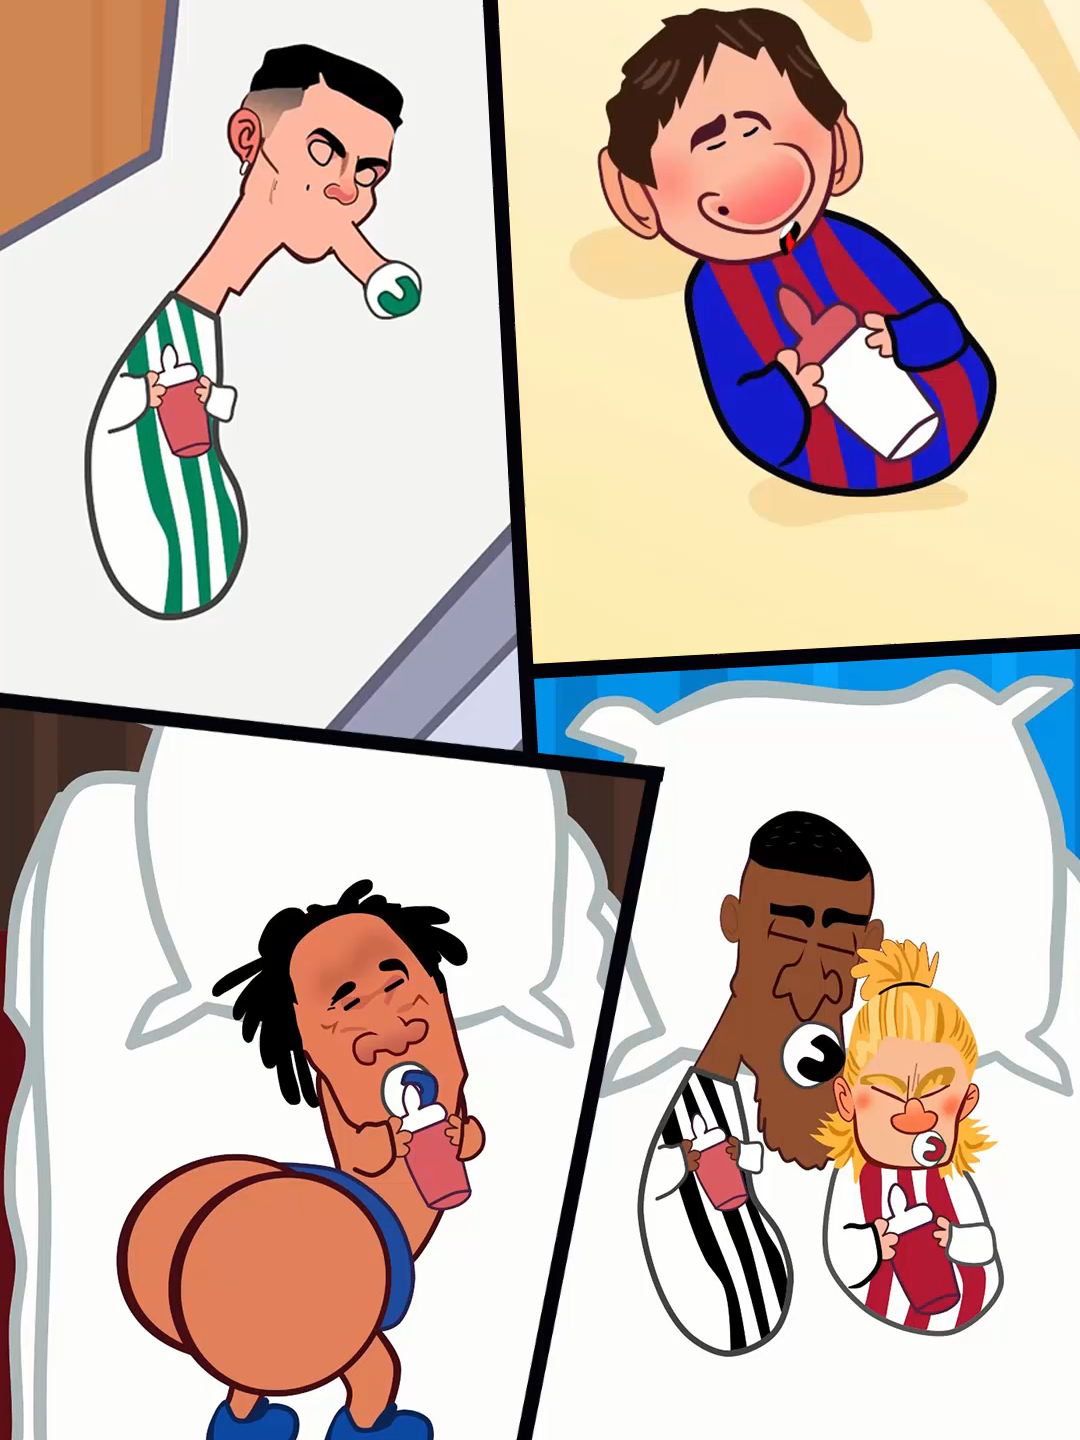 Sleeping style of football Players when they are Baby 🧒 #ronaldo #messi #vinijr #haaland #ramos #piques #sterling